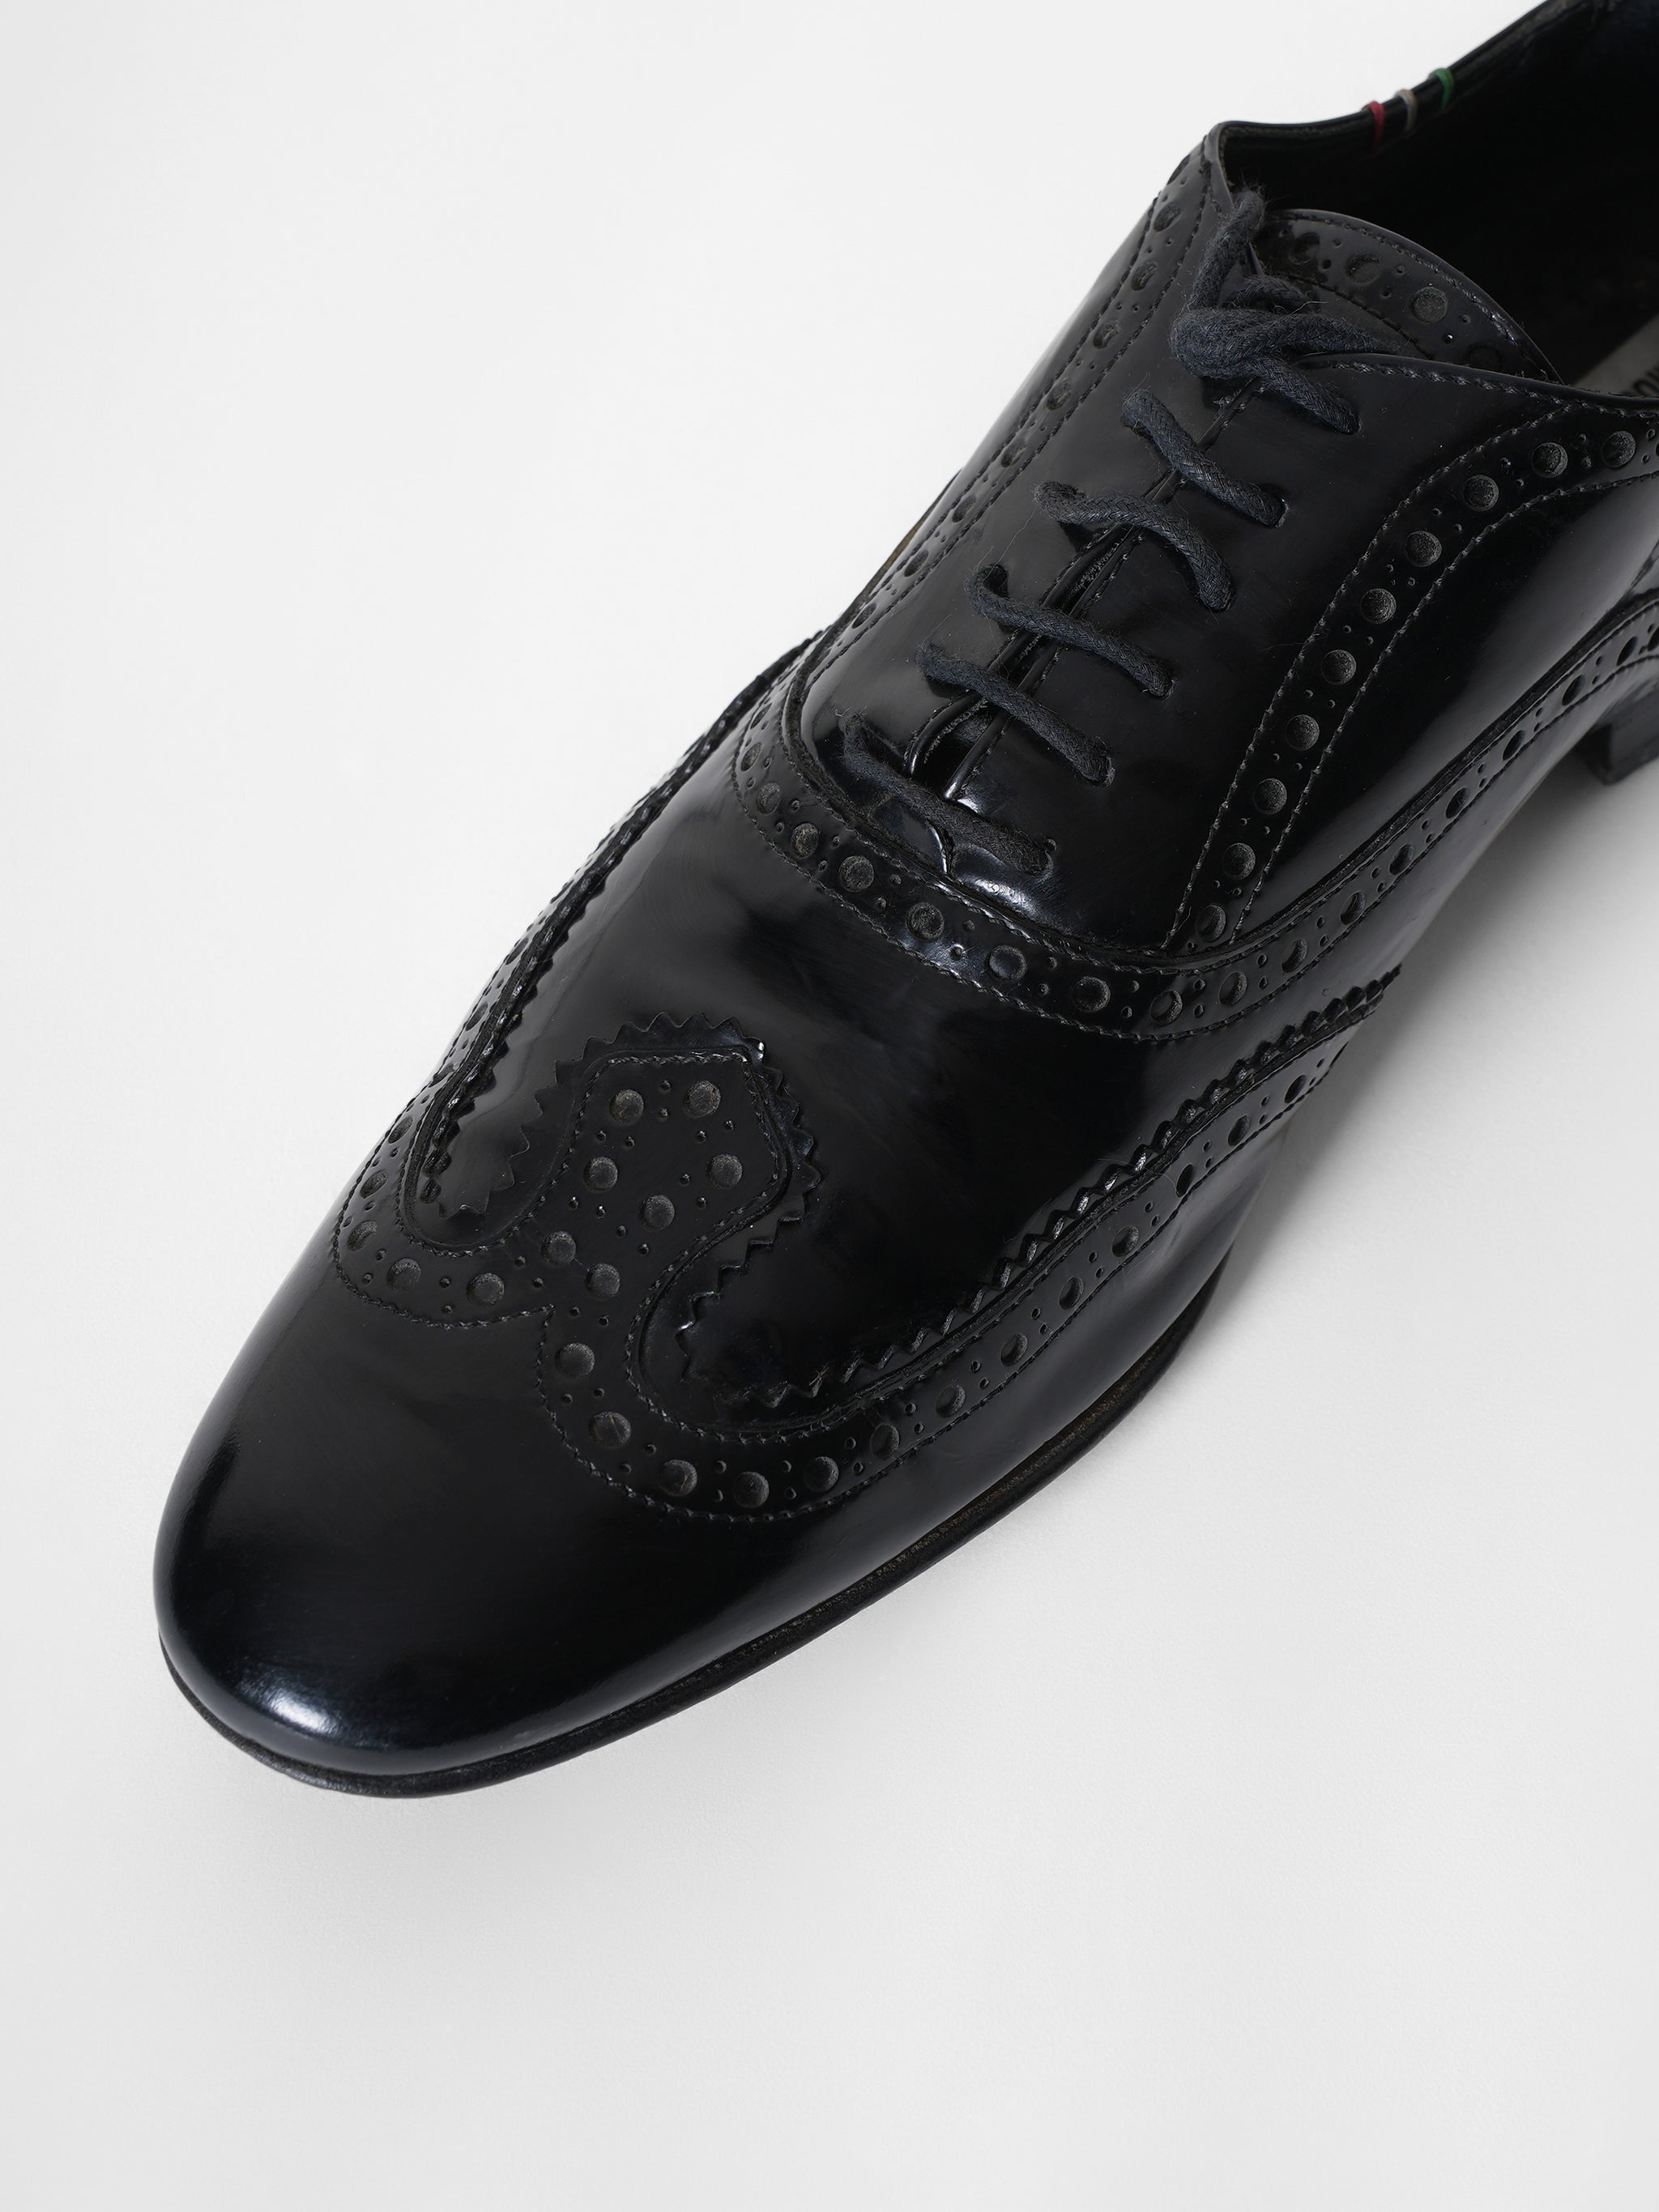 Moschino Patent Leather Black Oxfords